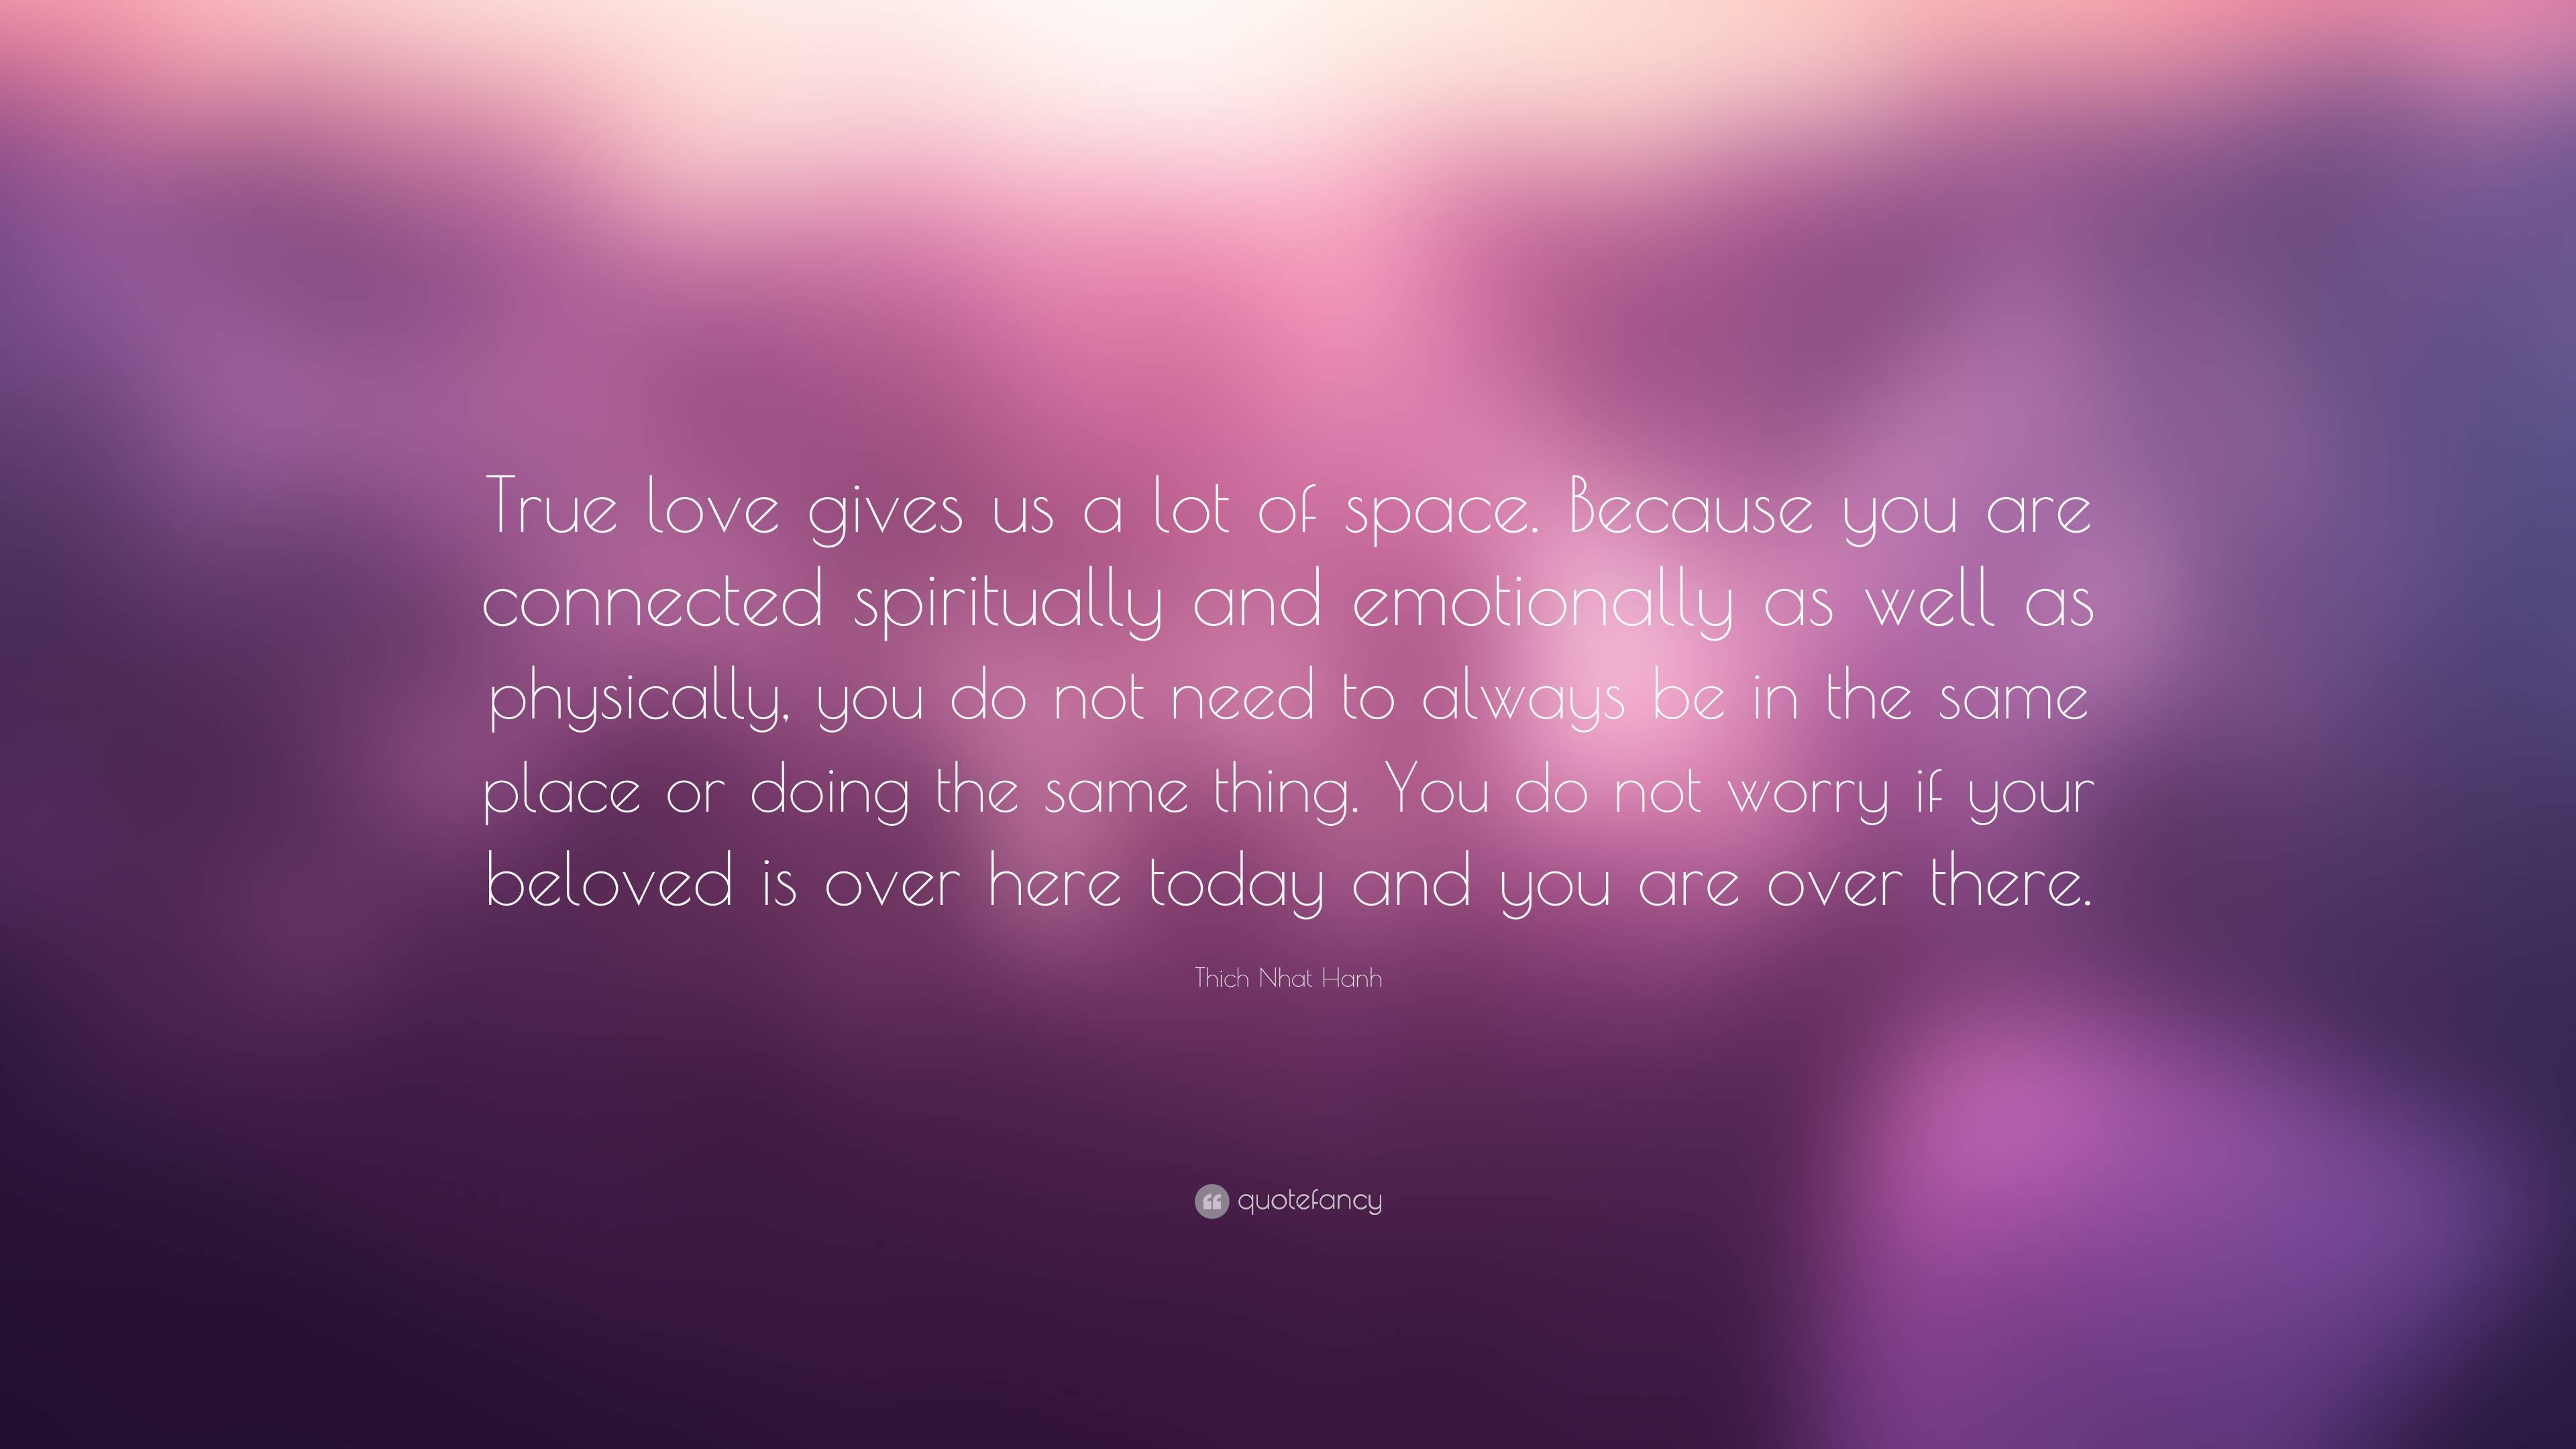 Thich Nhat Hanh Quote: “True love gives us a lot of space. Because you ...